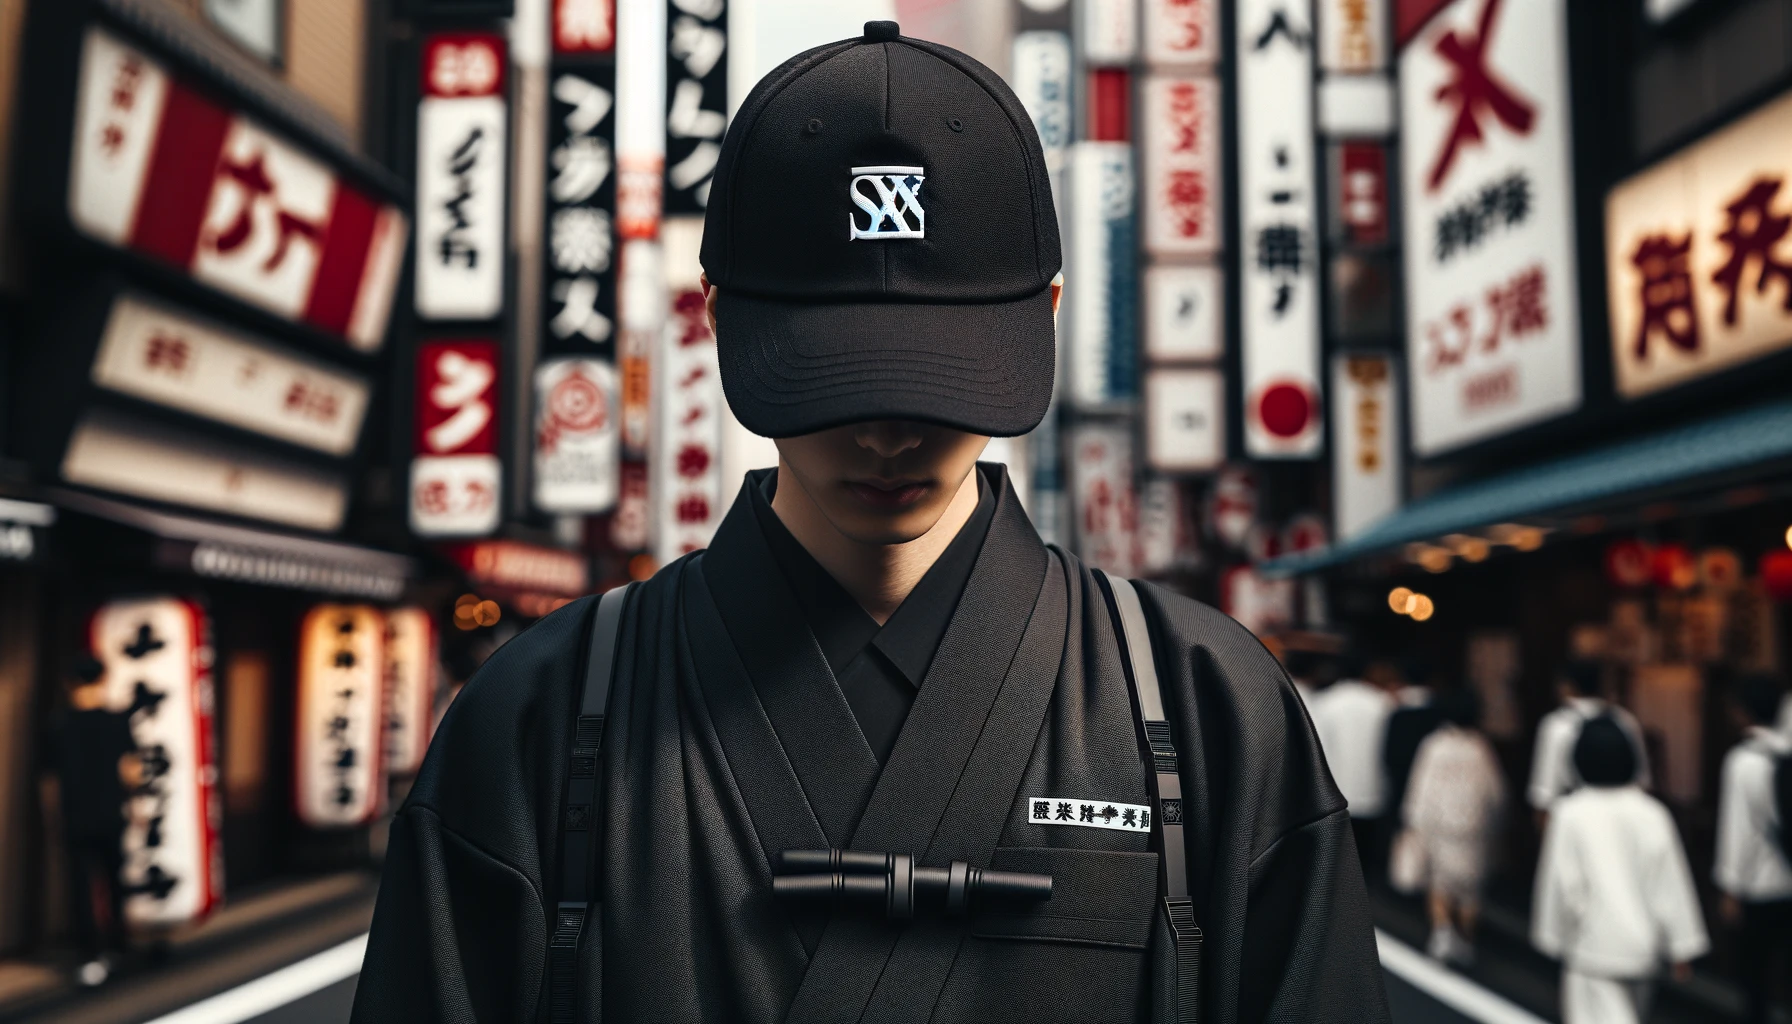 Japanese fashion coordination with a cap featuring a large black and white logo in the center. The cap has 'SX' letters, with the logo blurred, removed, or not visible from the angle. The image focuses on the stylish Japanese outfit.